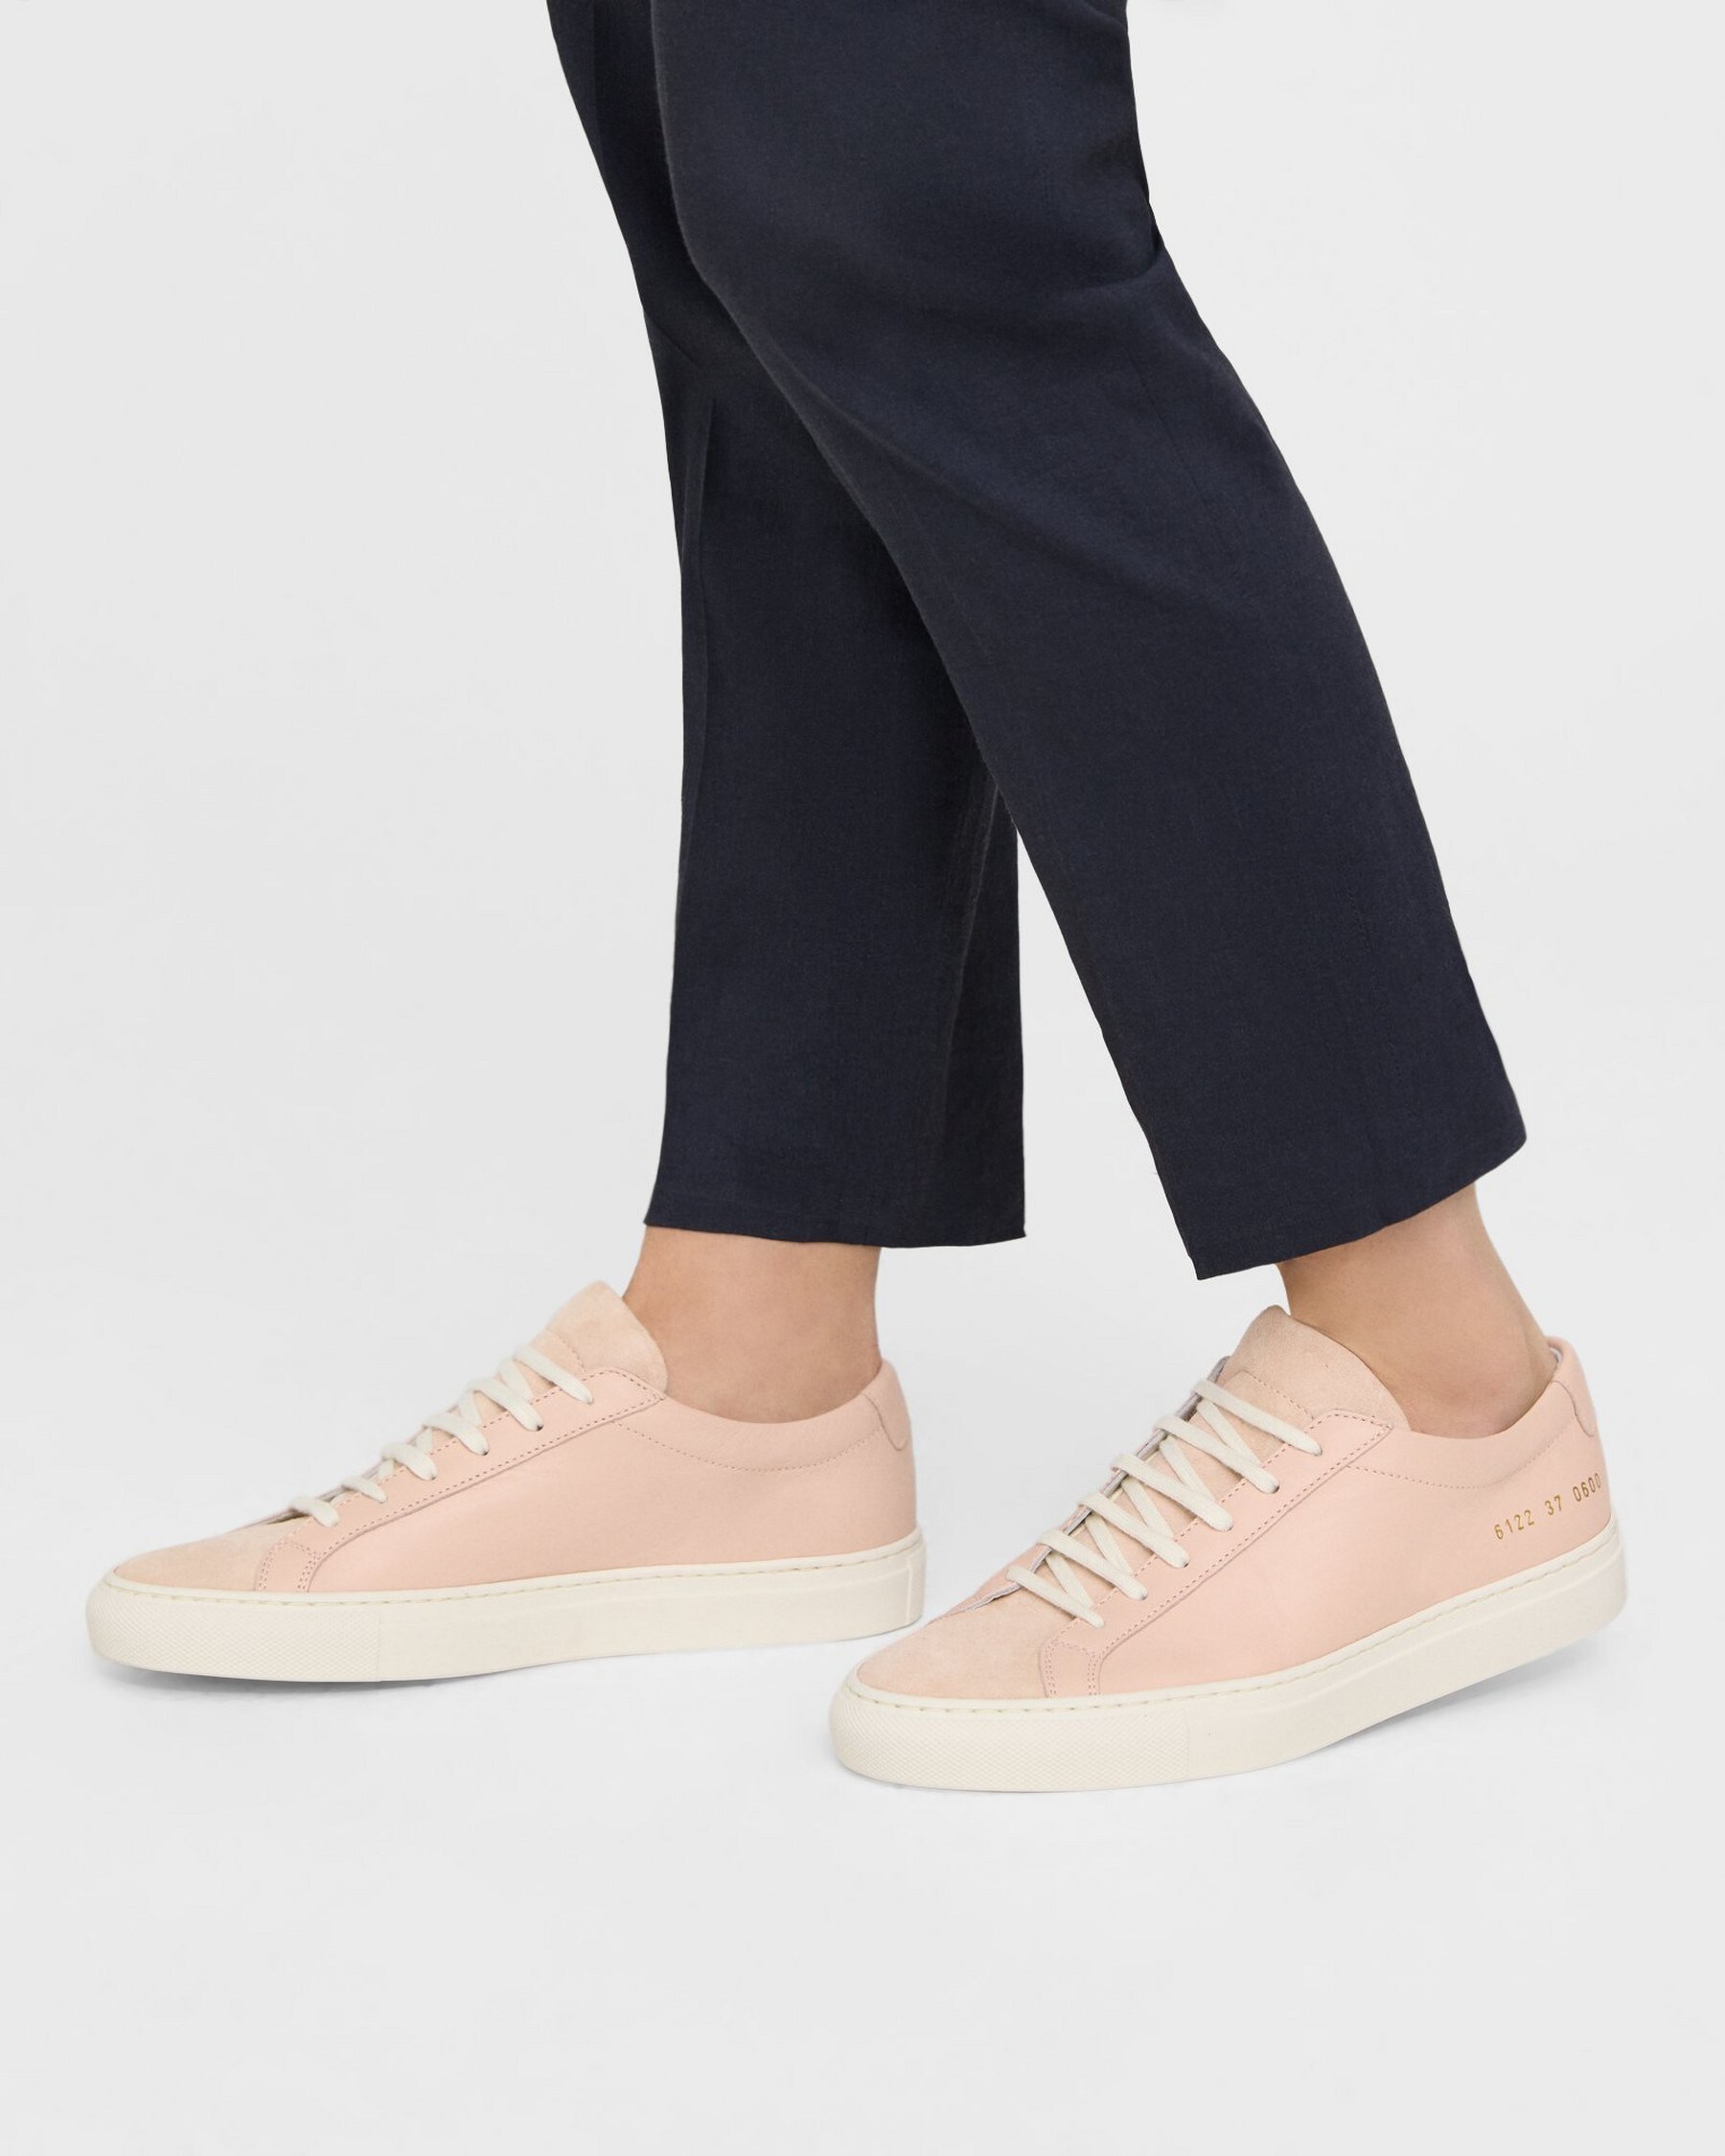 Theory Common Projects Women's Original Achilles Sneakers